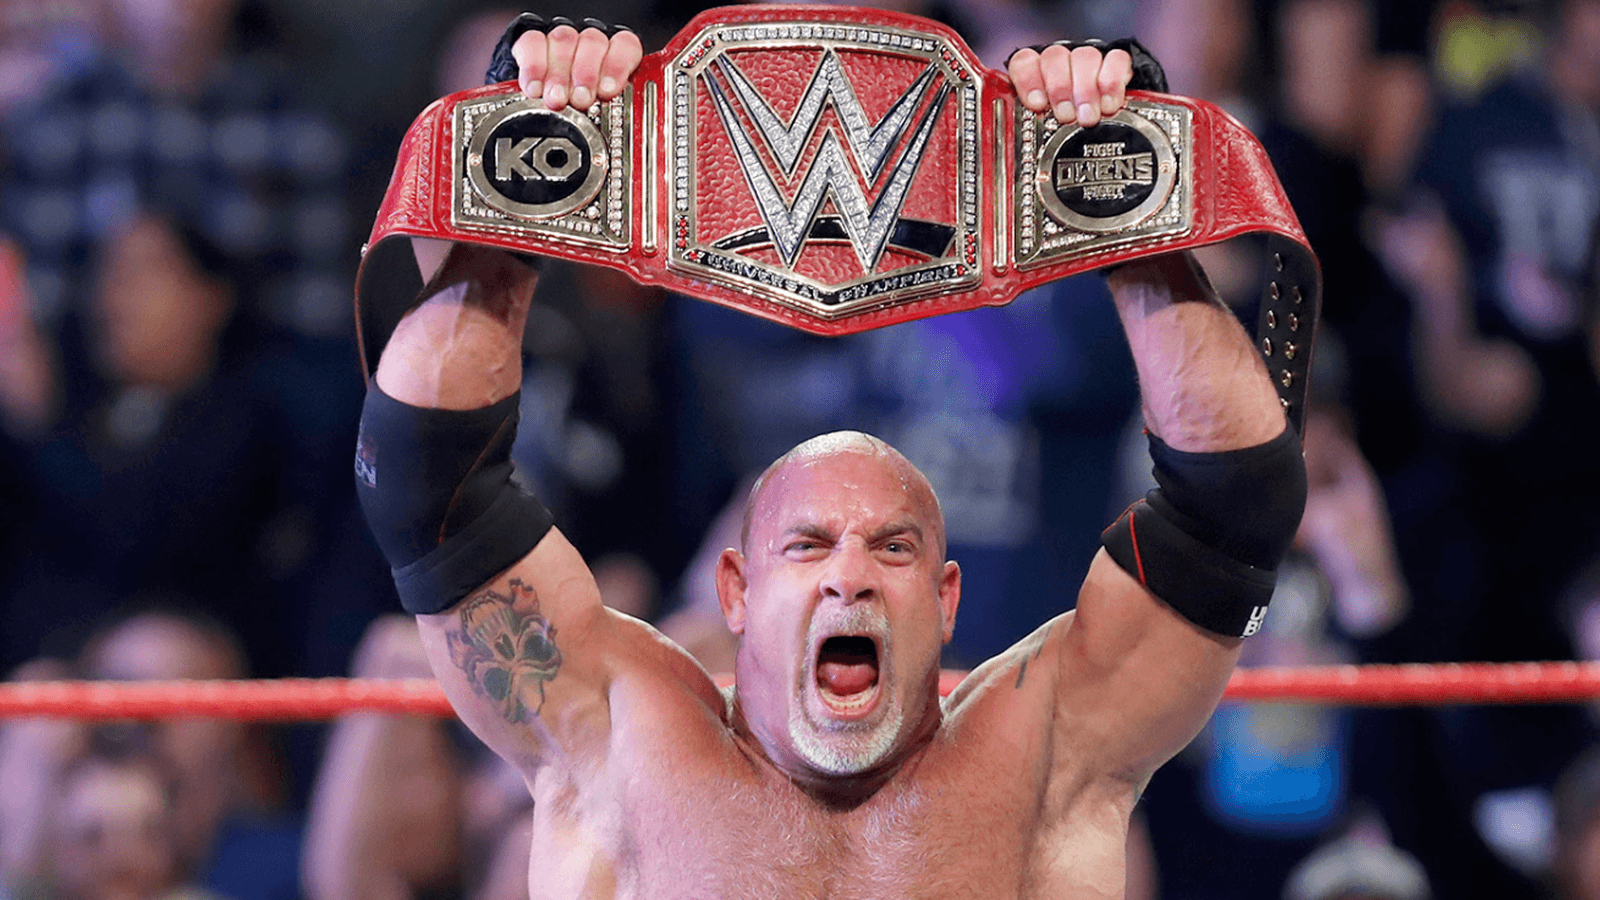 WWE wrestles with its past as 90s star Bill Goldberg rises again